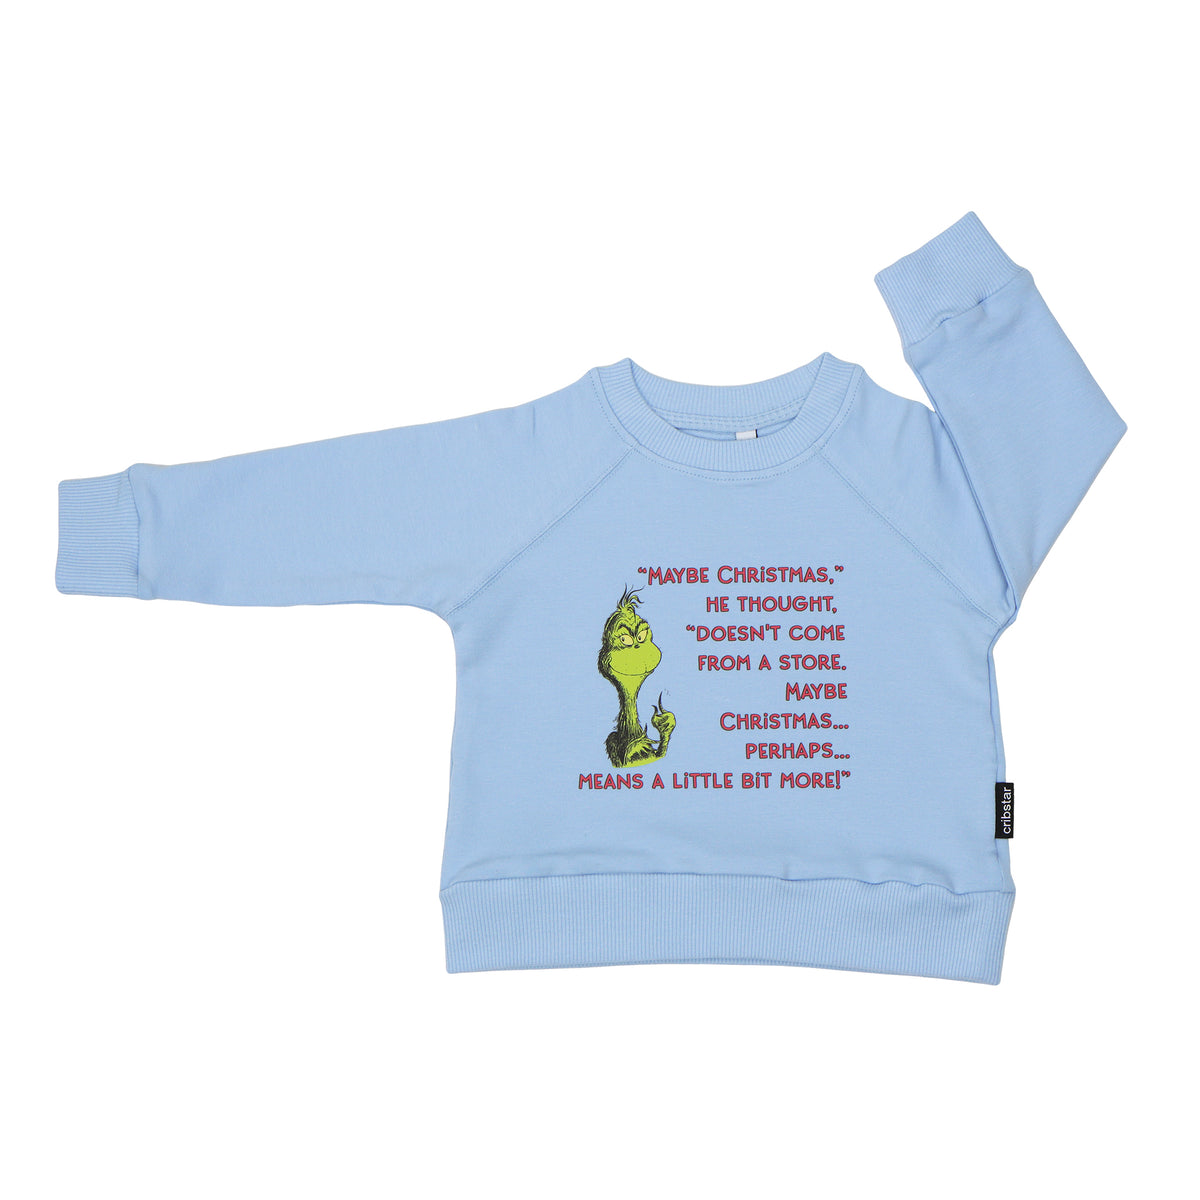 The Grinch Sweatshirt - Christmas Means More - Baby Blue